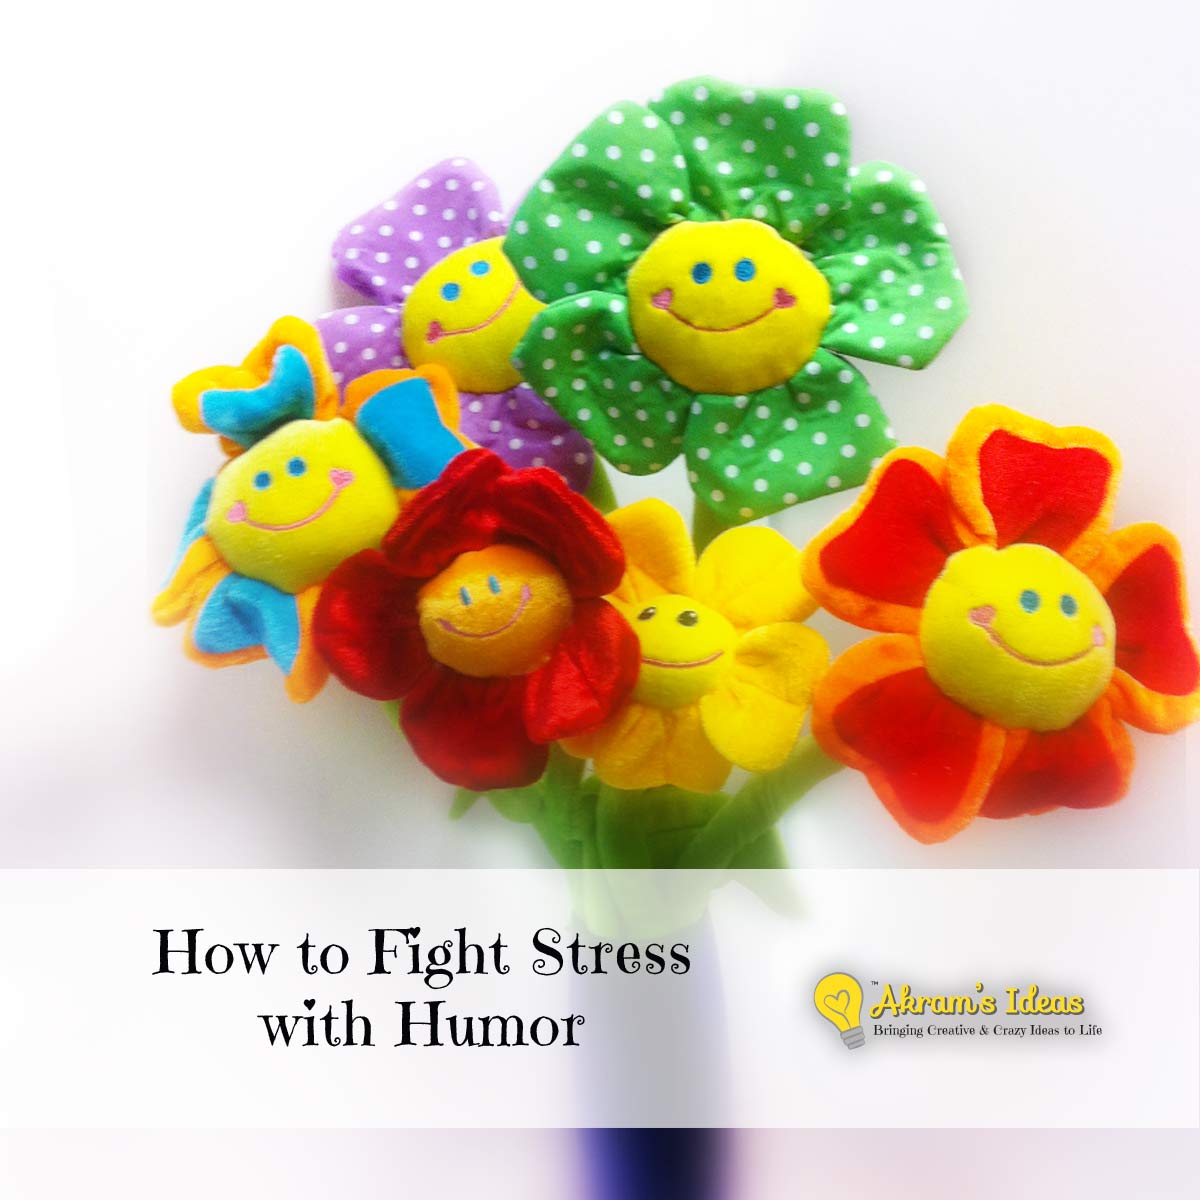 How to Fight Stress with Humor